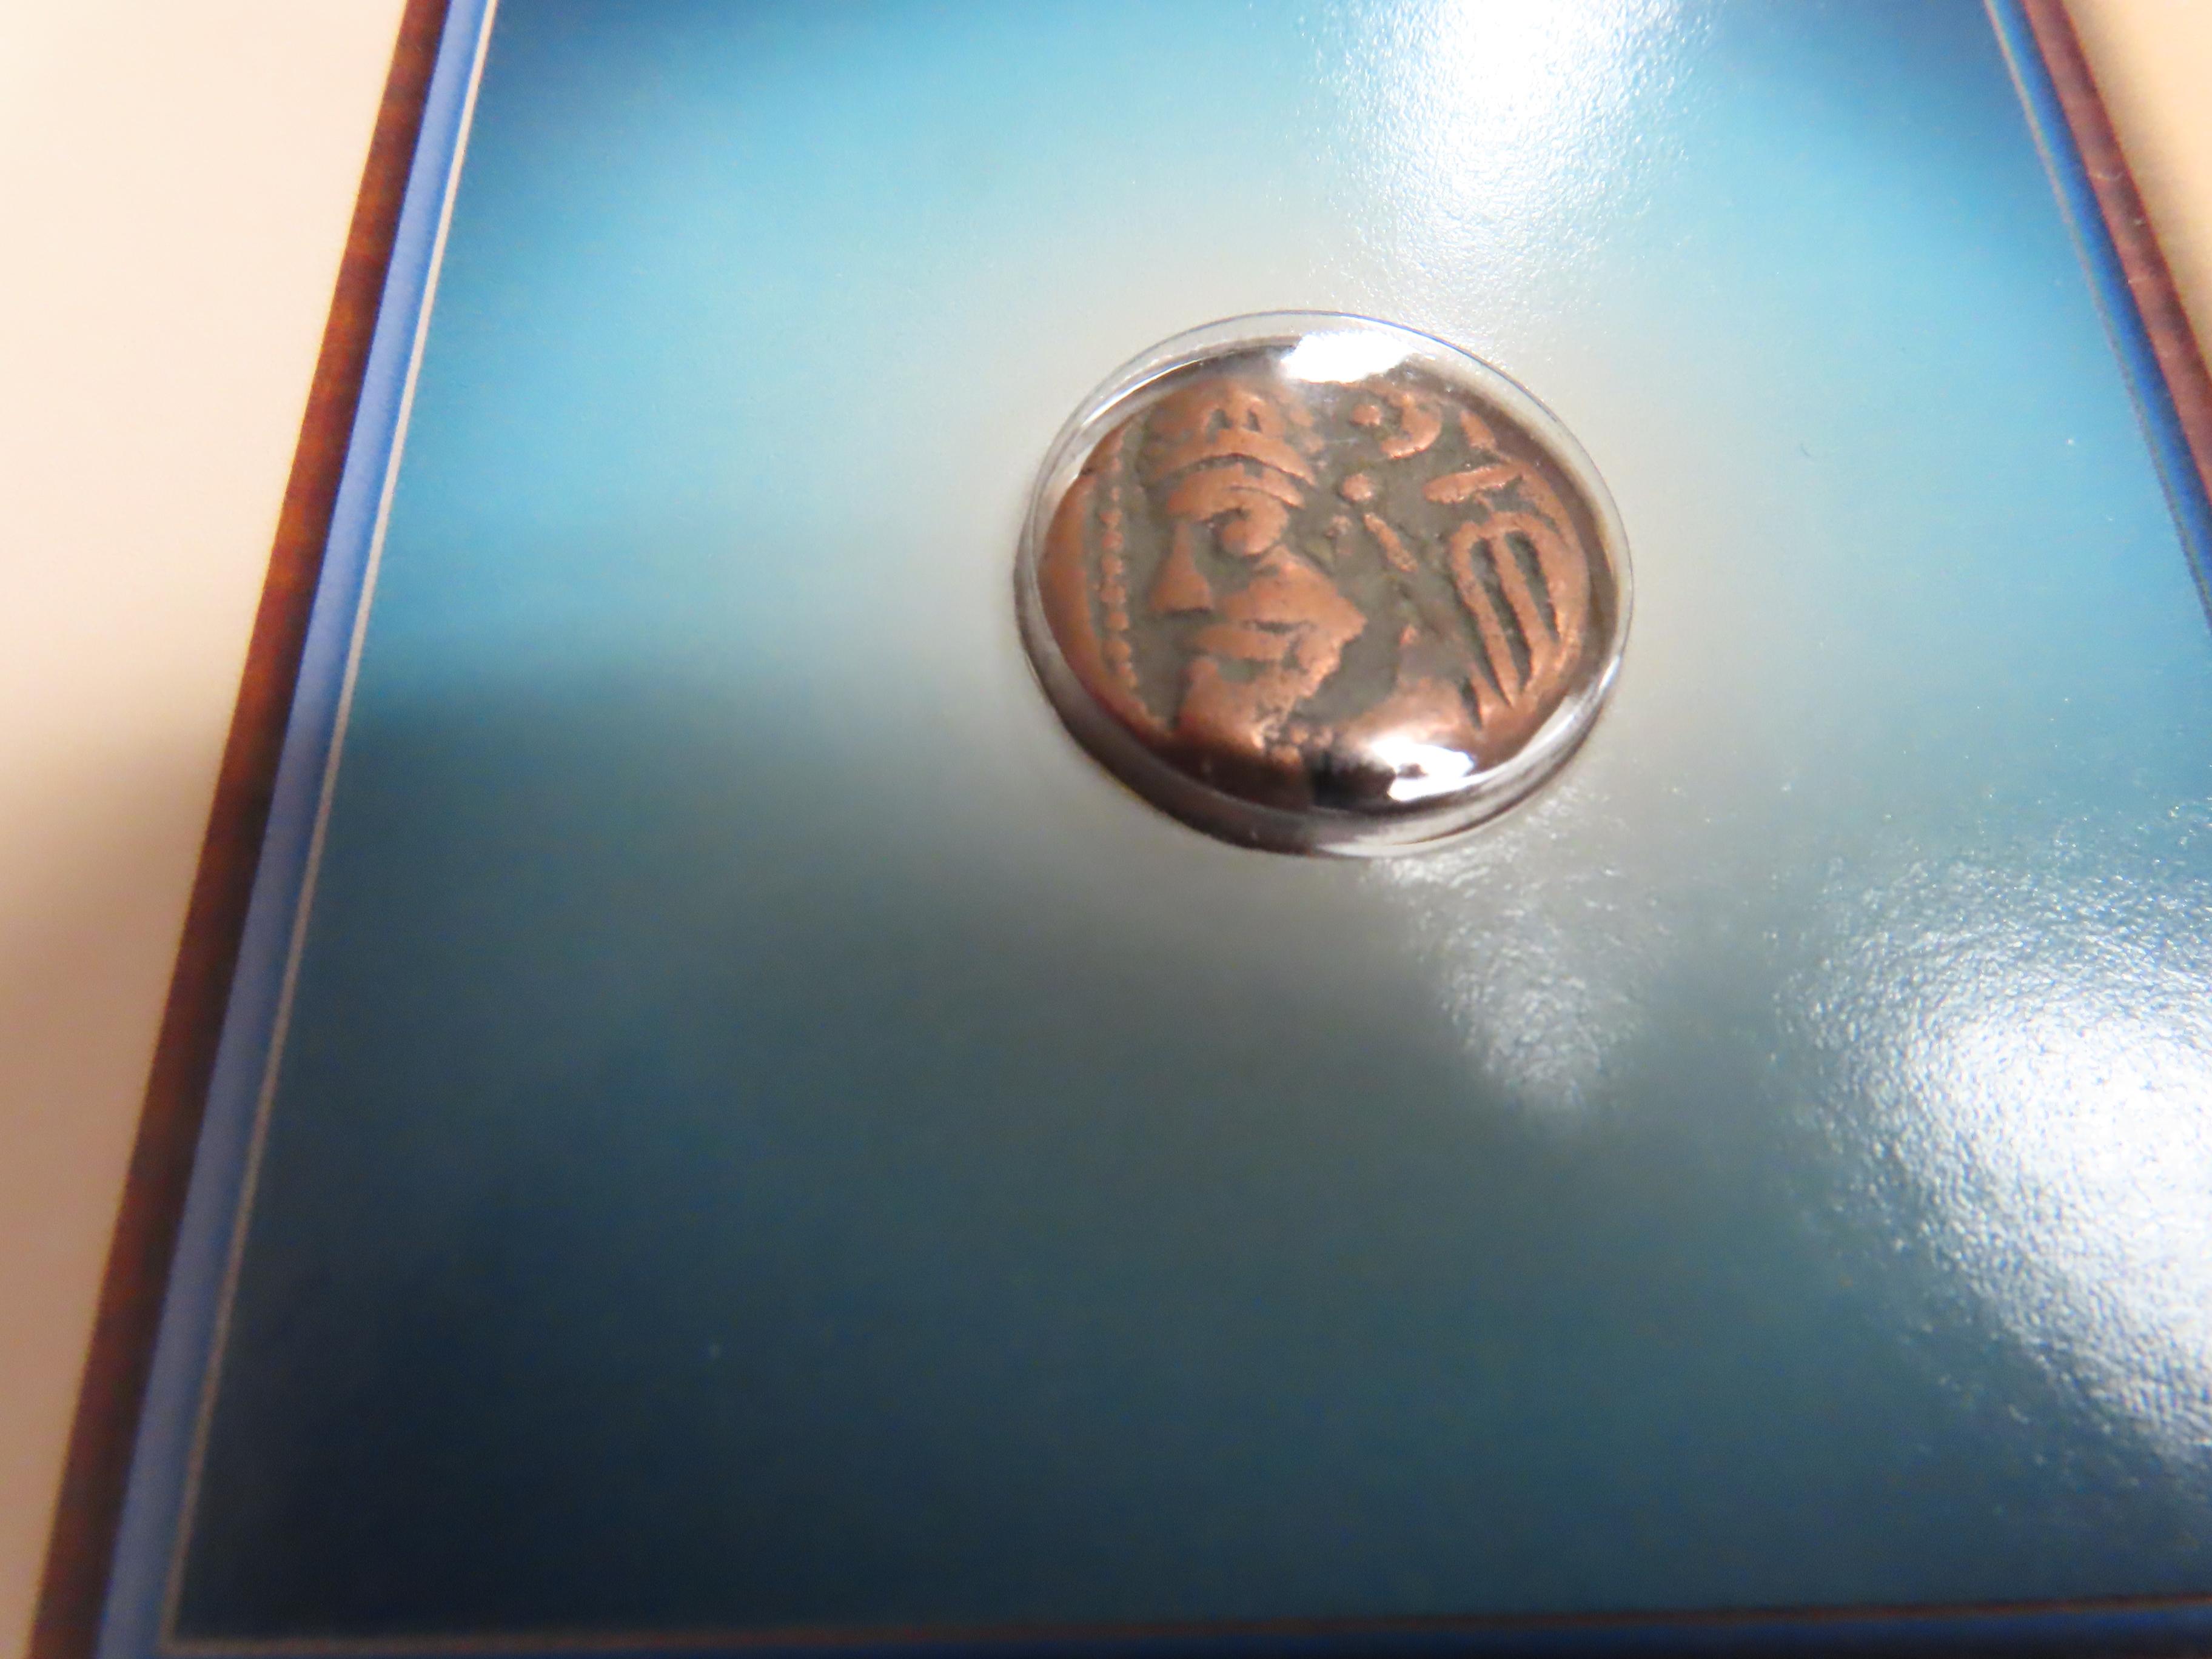 Elymais Kings Drachm, Persia, 2nd Century AD. note sure if this a study aid or authentic coin?